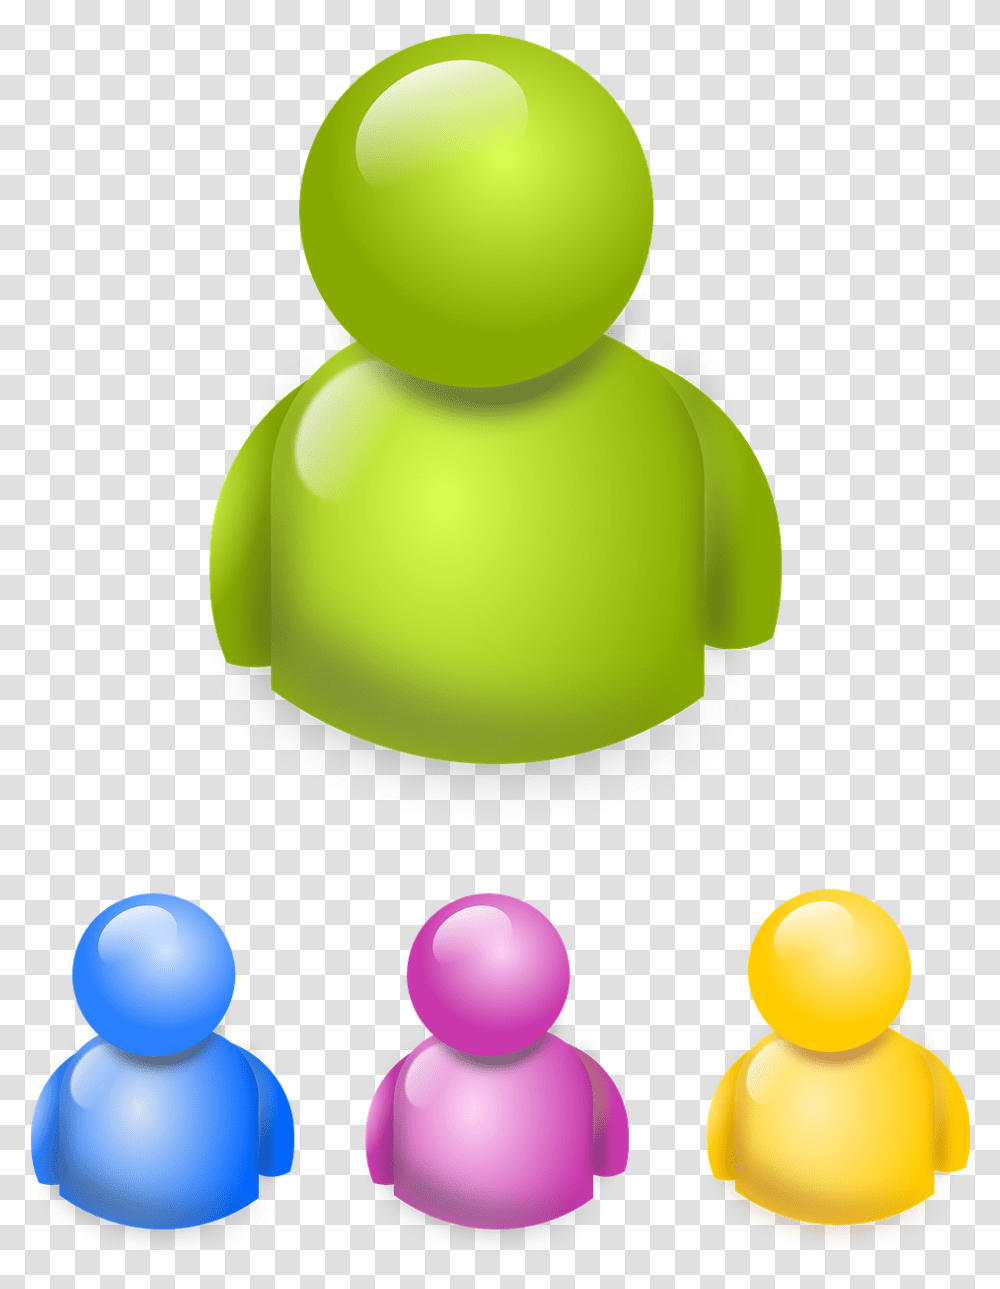 Buddy Chat Person Messaging Picpng Clip Art People Icon Free, Sphere, Electronics, Duel, Robot Transparent Png